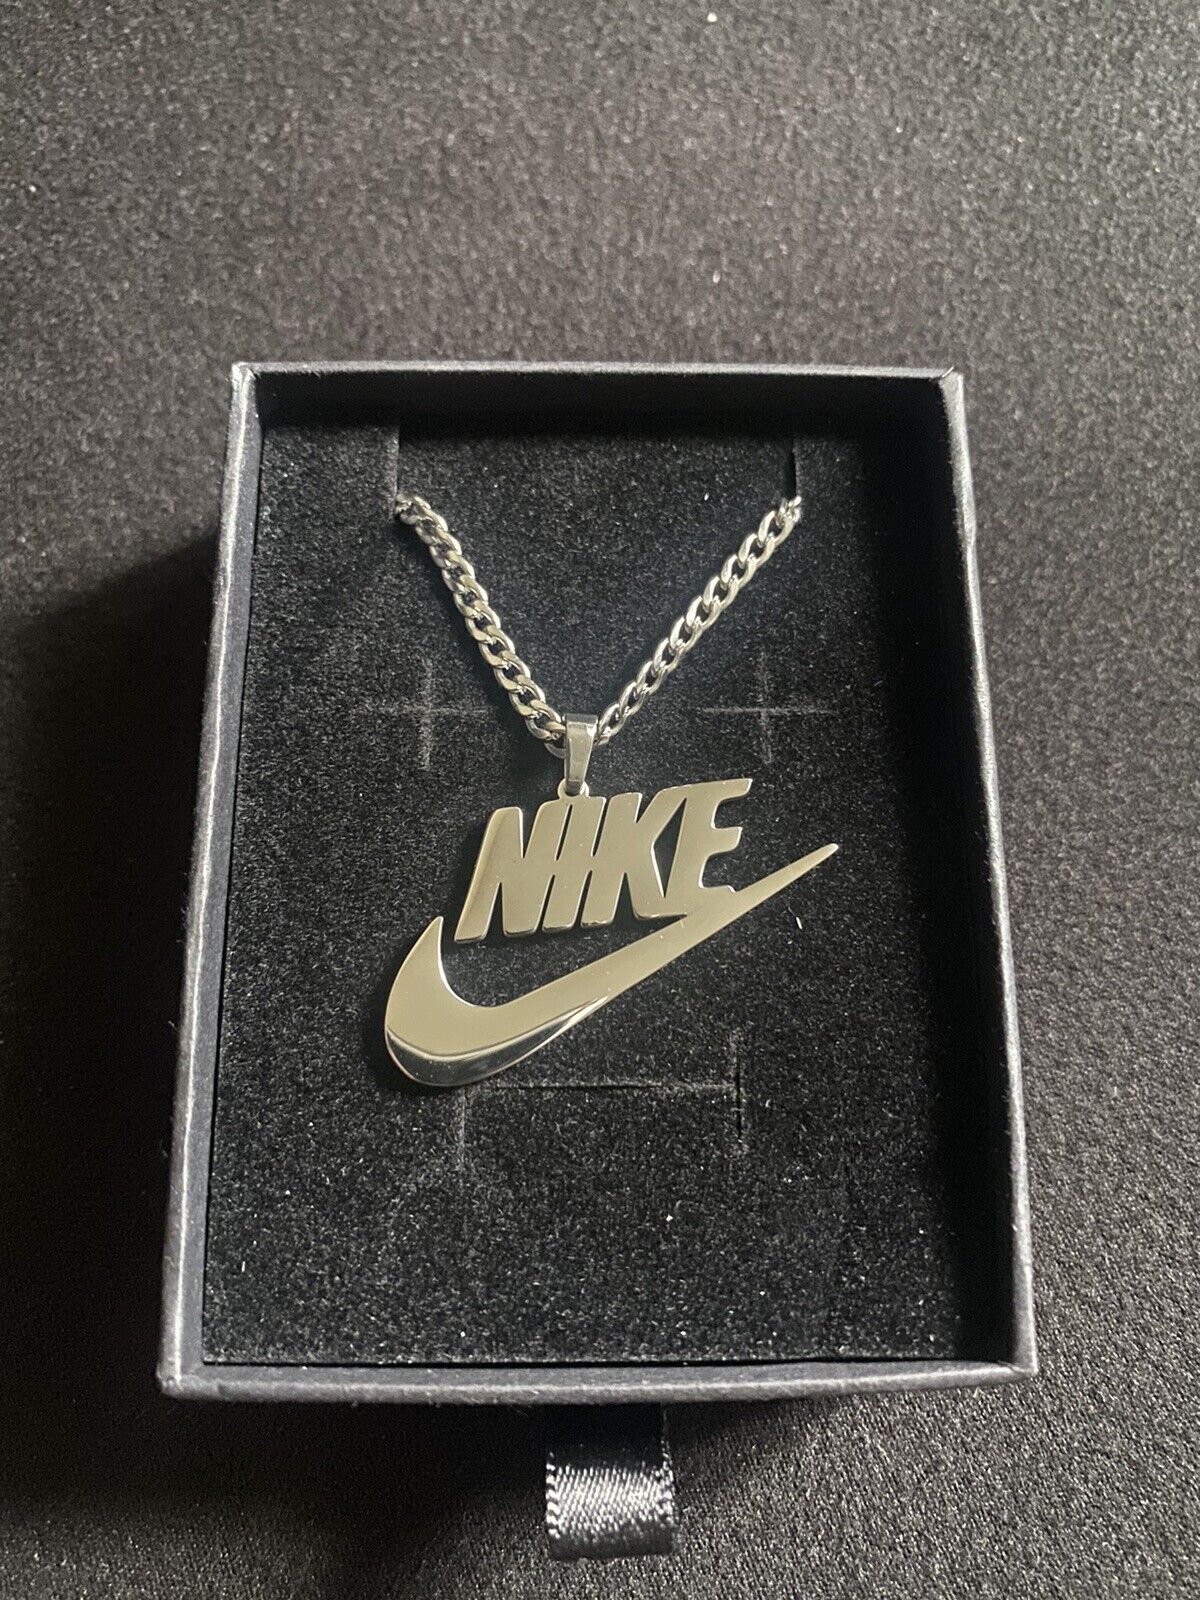 Plasticidad Asimilar Orgulloso Nike Swoosh Pendant/Chain/Necklace (Silver Plated) - Stainless Steel | eBay